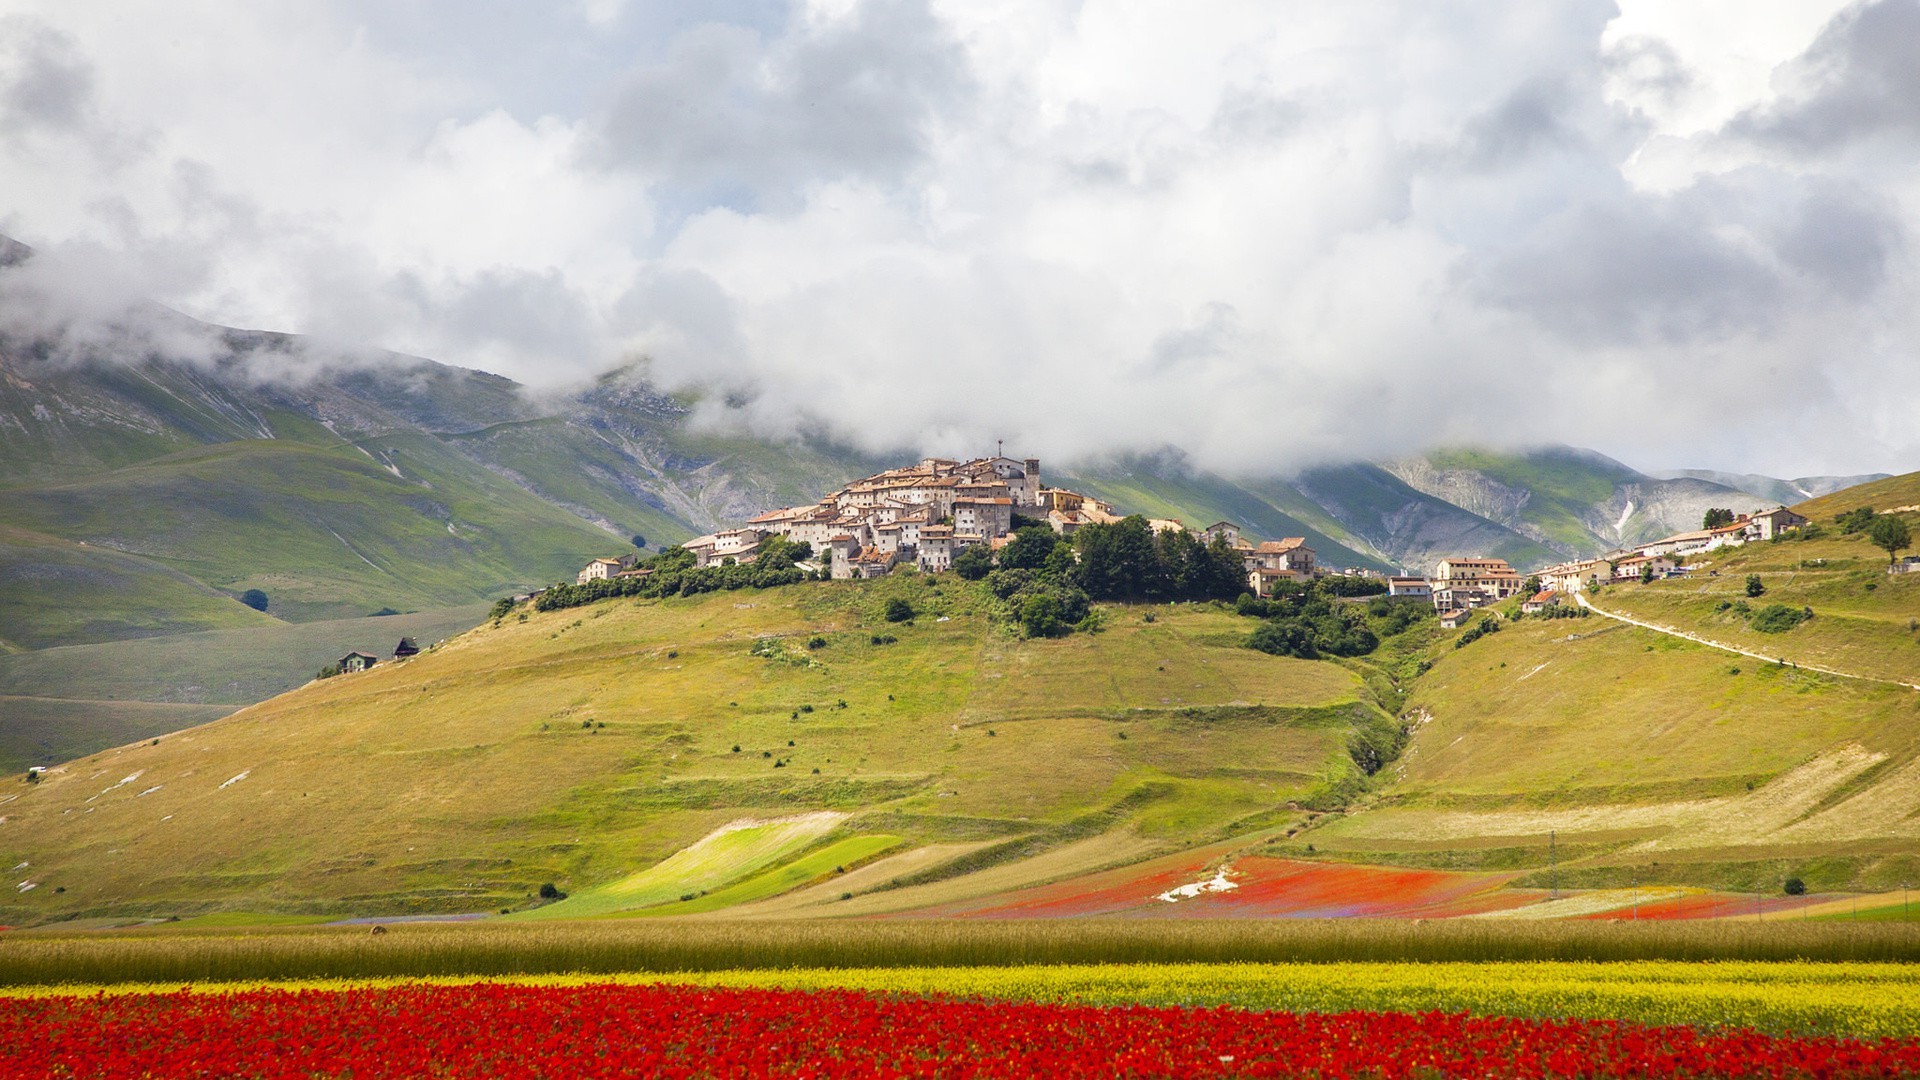 landscape, Nature, Architecture, Clouds, Italy, Building, House, Villages, Hill, Field, Trees, Red Flowers, Mountain, Mist Wallpaper